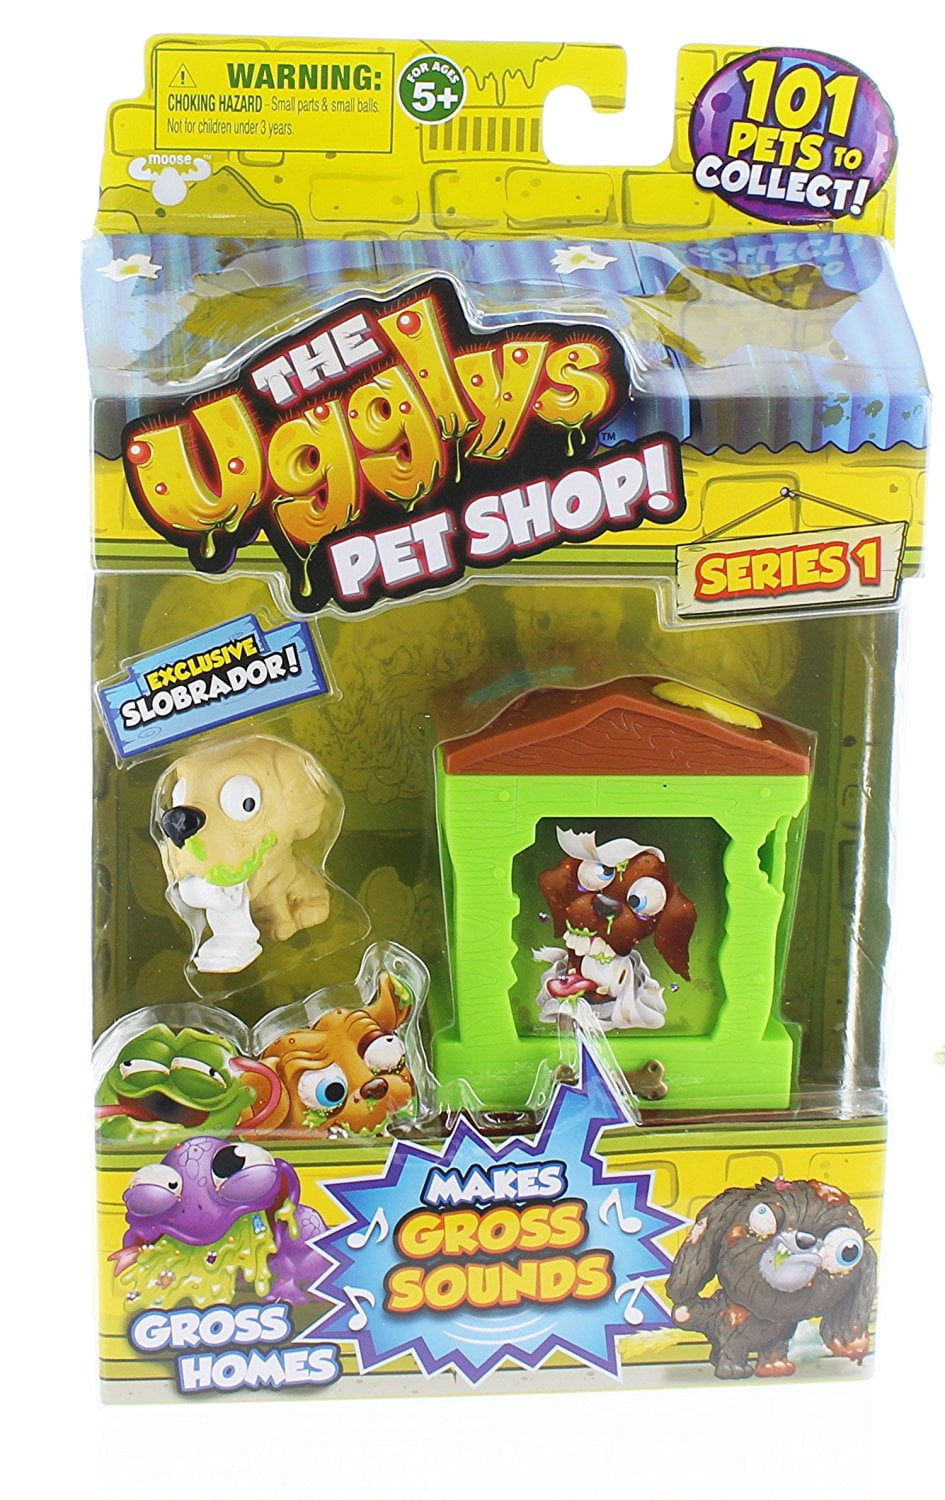 The Ugglys Pet Shop Gross Mutt Figurines Cans Includes 3 From Series 1 for sale online 